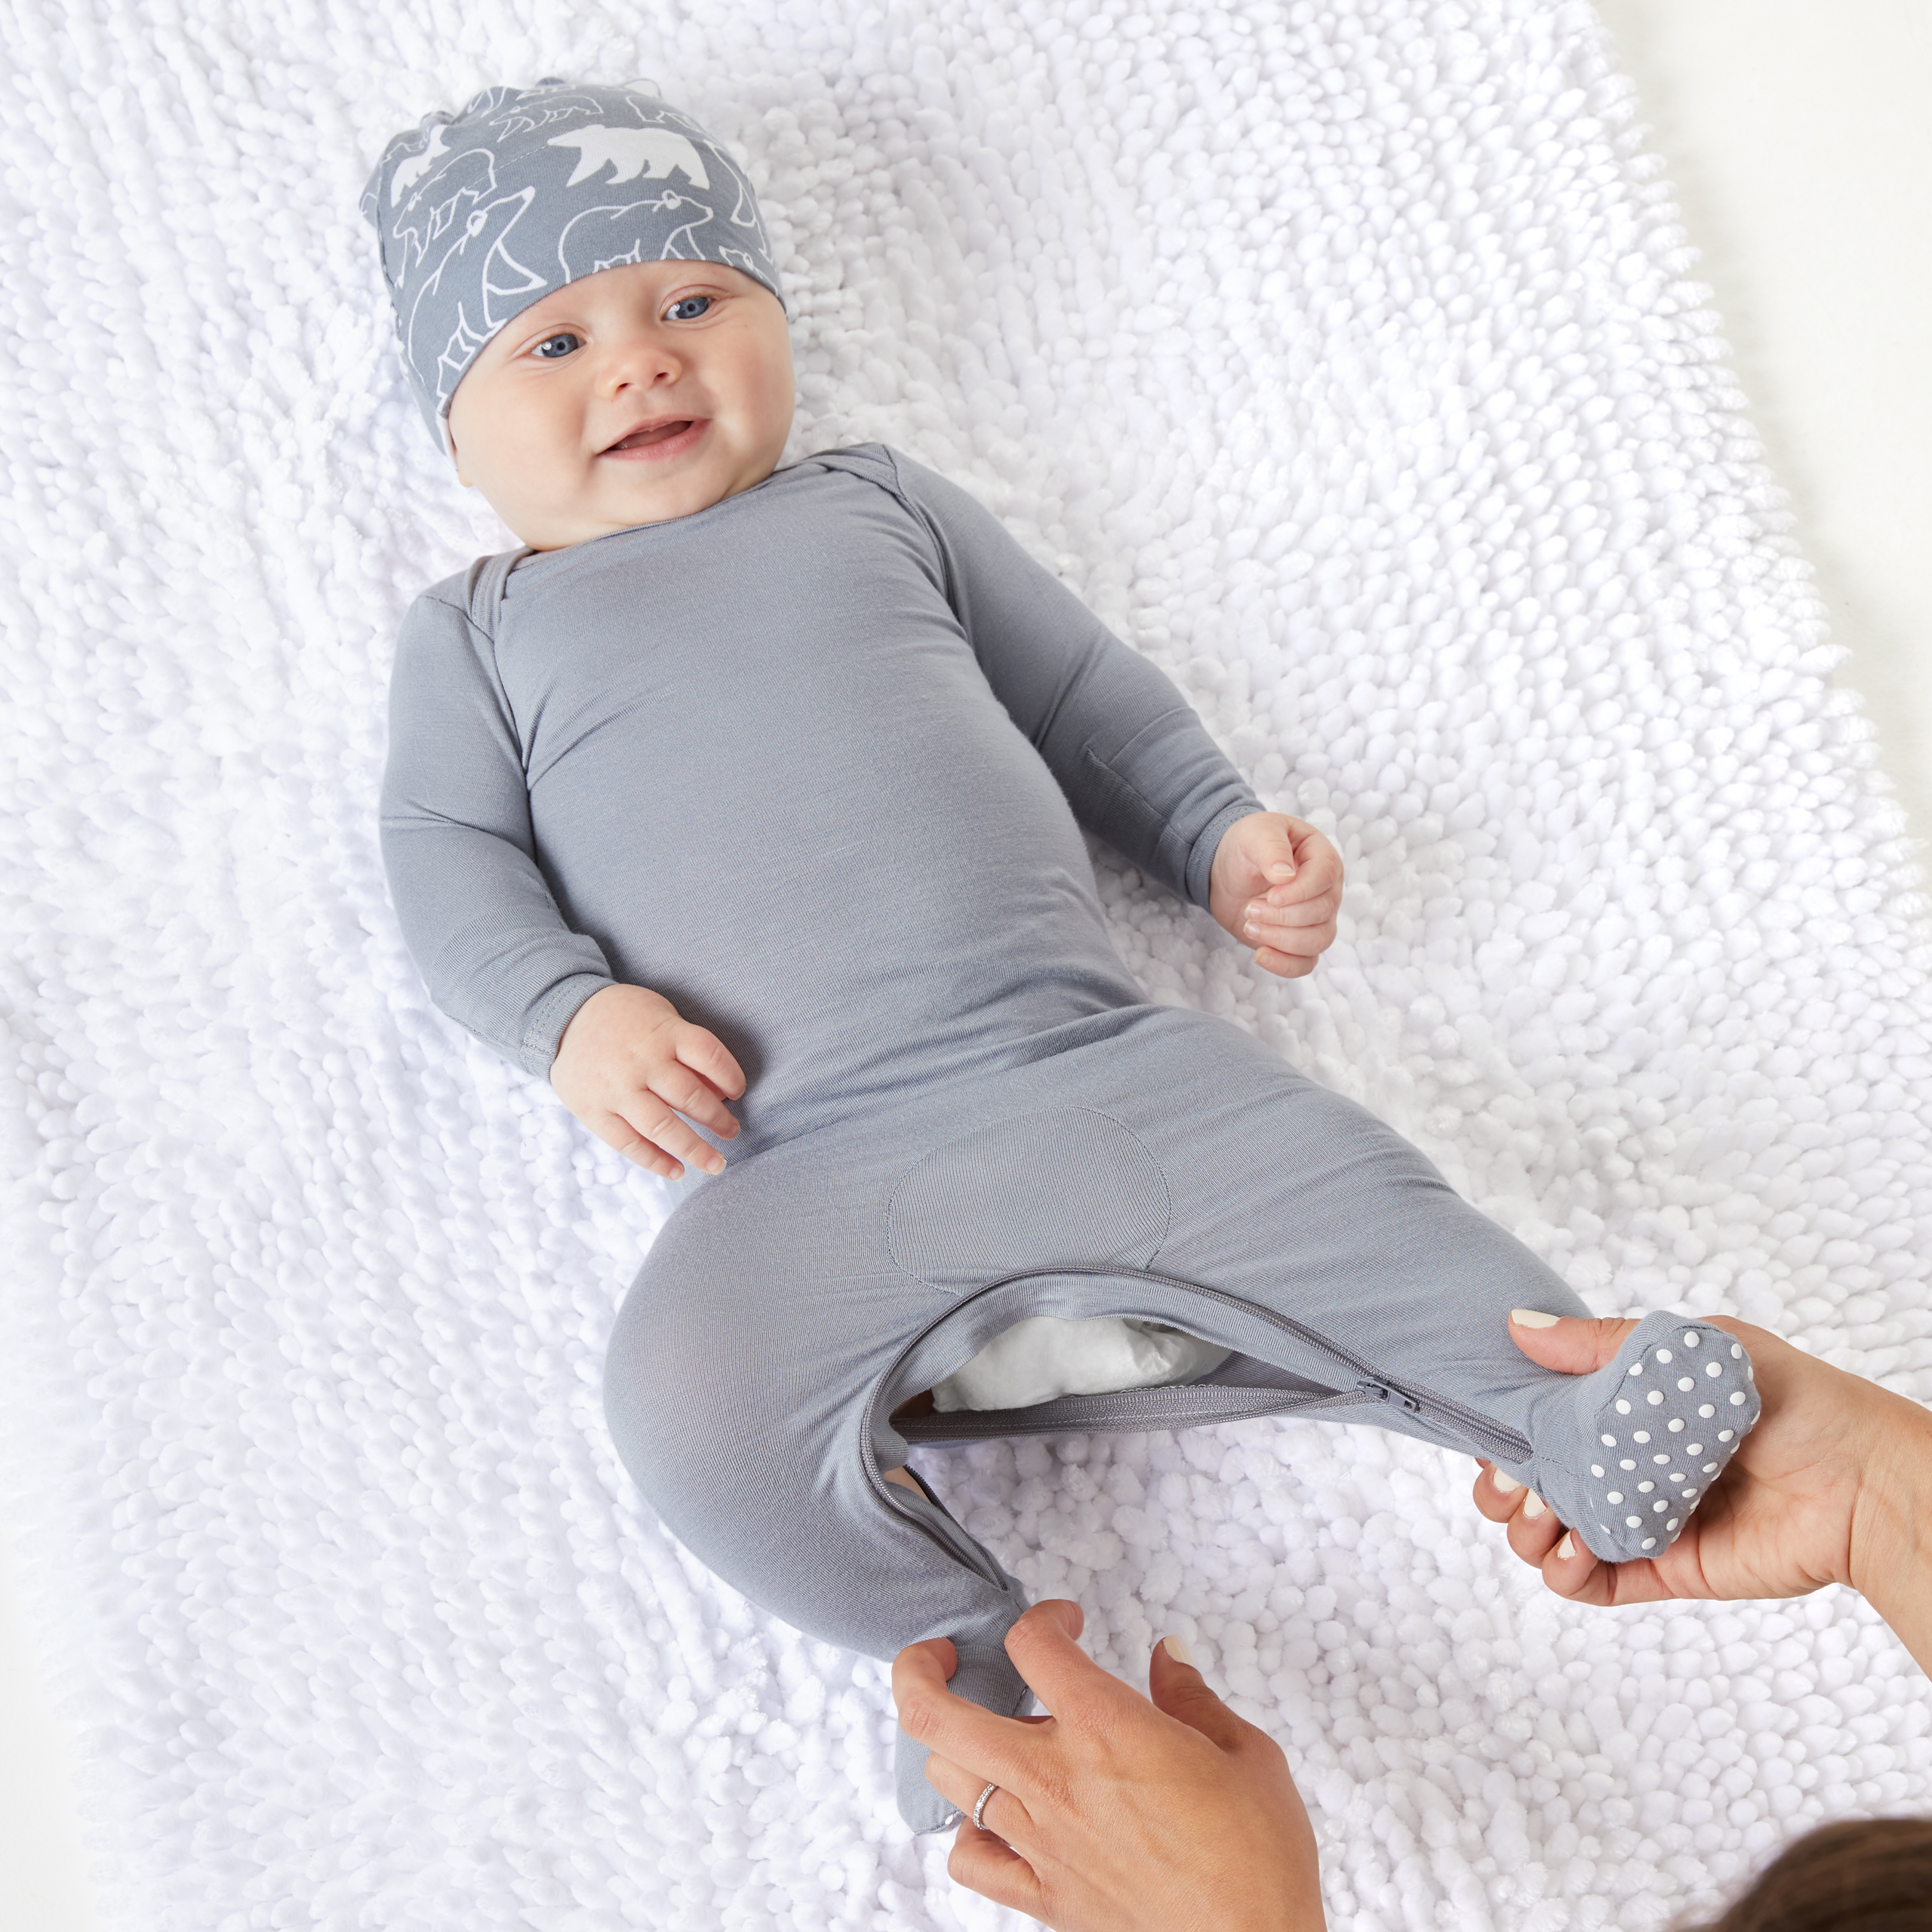 Find the Best Winter PJs for Your Baby